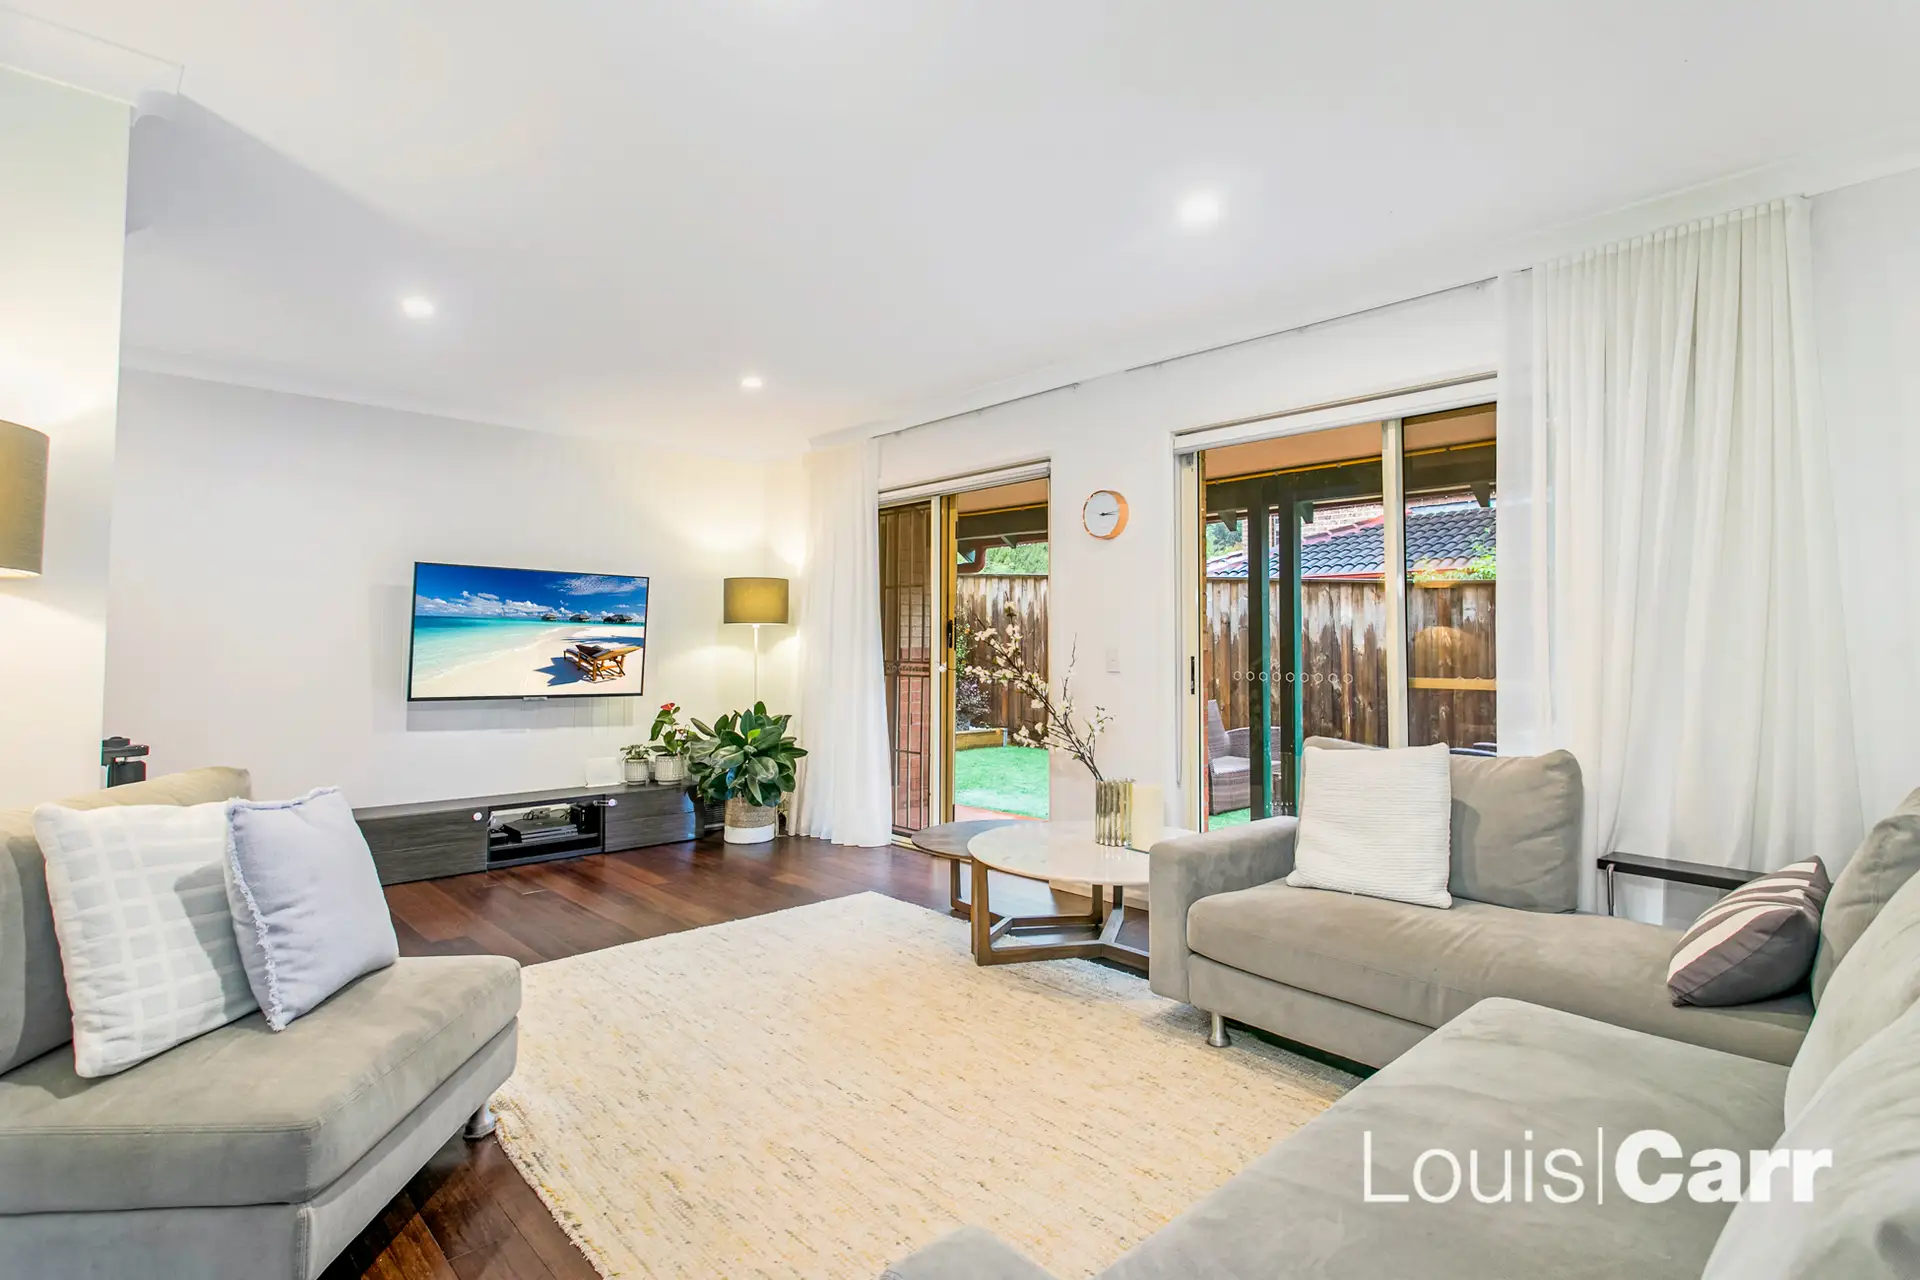 Photo #3: 5/167-169 Victoria Road, West Pennant Hills - Sold by Louis Carr Real Estate